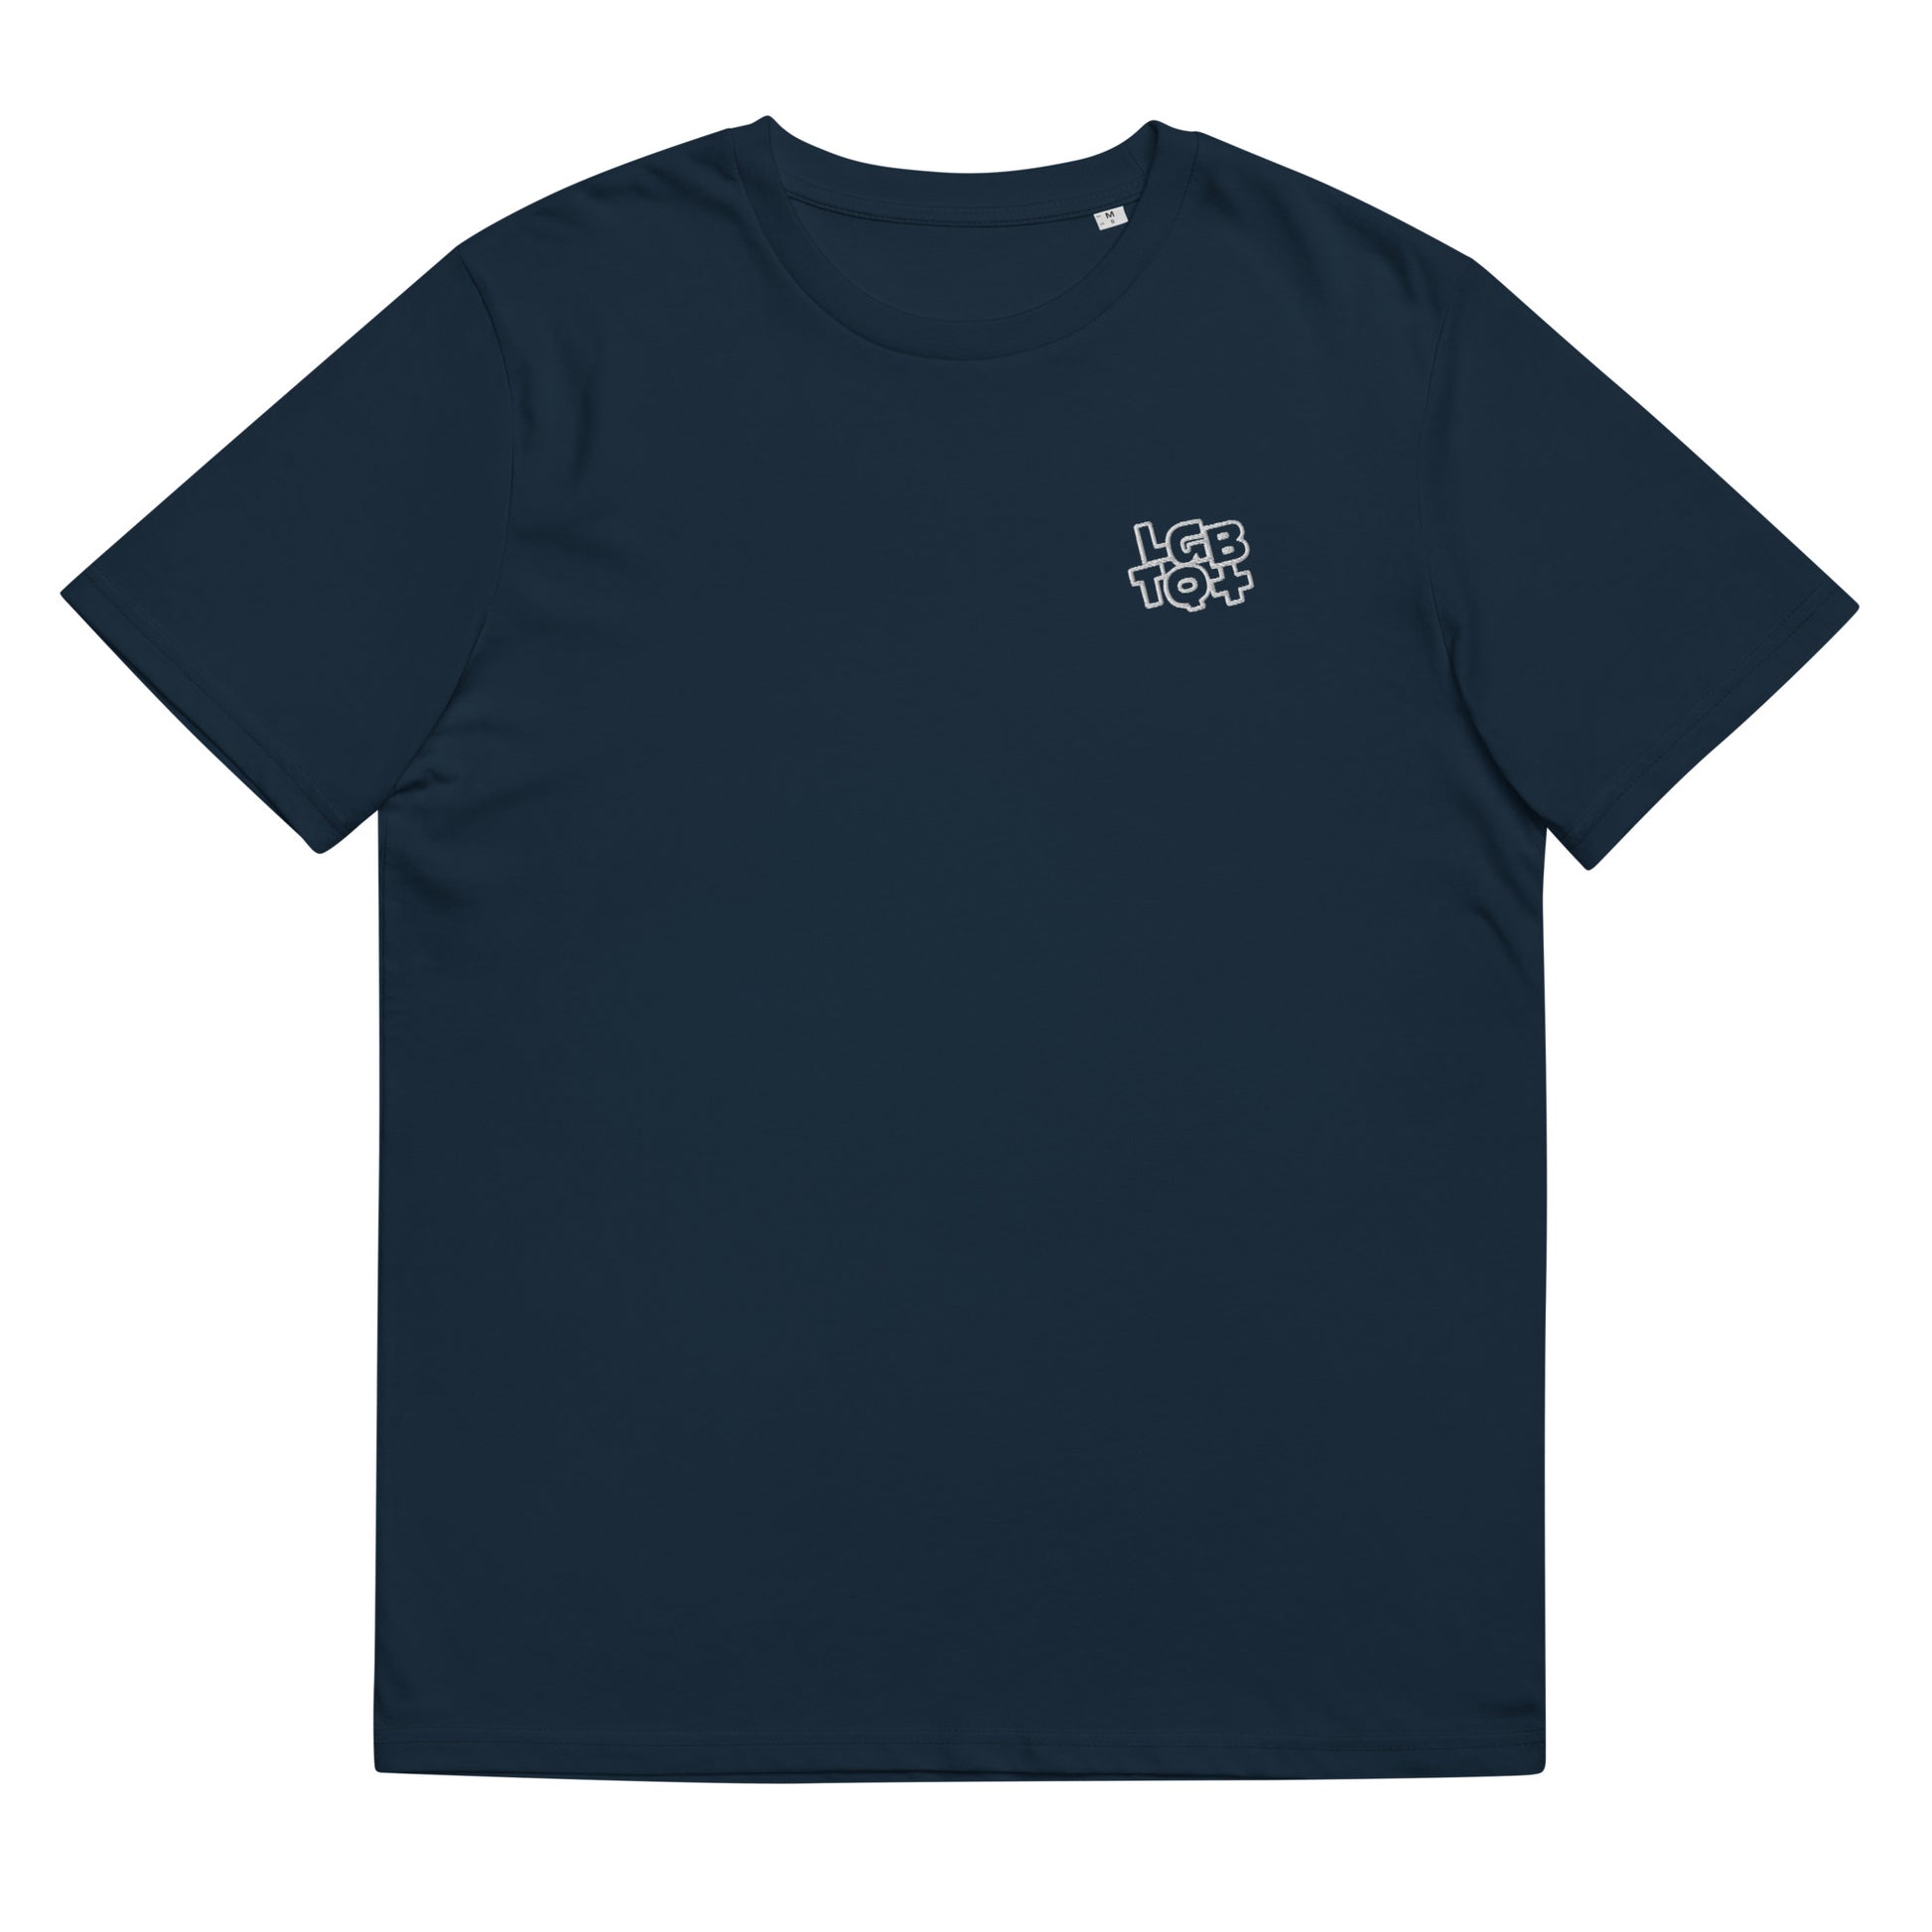 Fitted french navy blue organic cotton t-shirt with a small embroidered LGBTQ+ design on the left chest. Available in sizes S to 3XL.